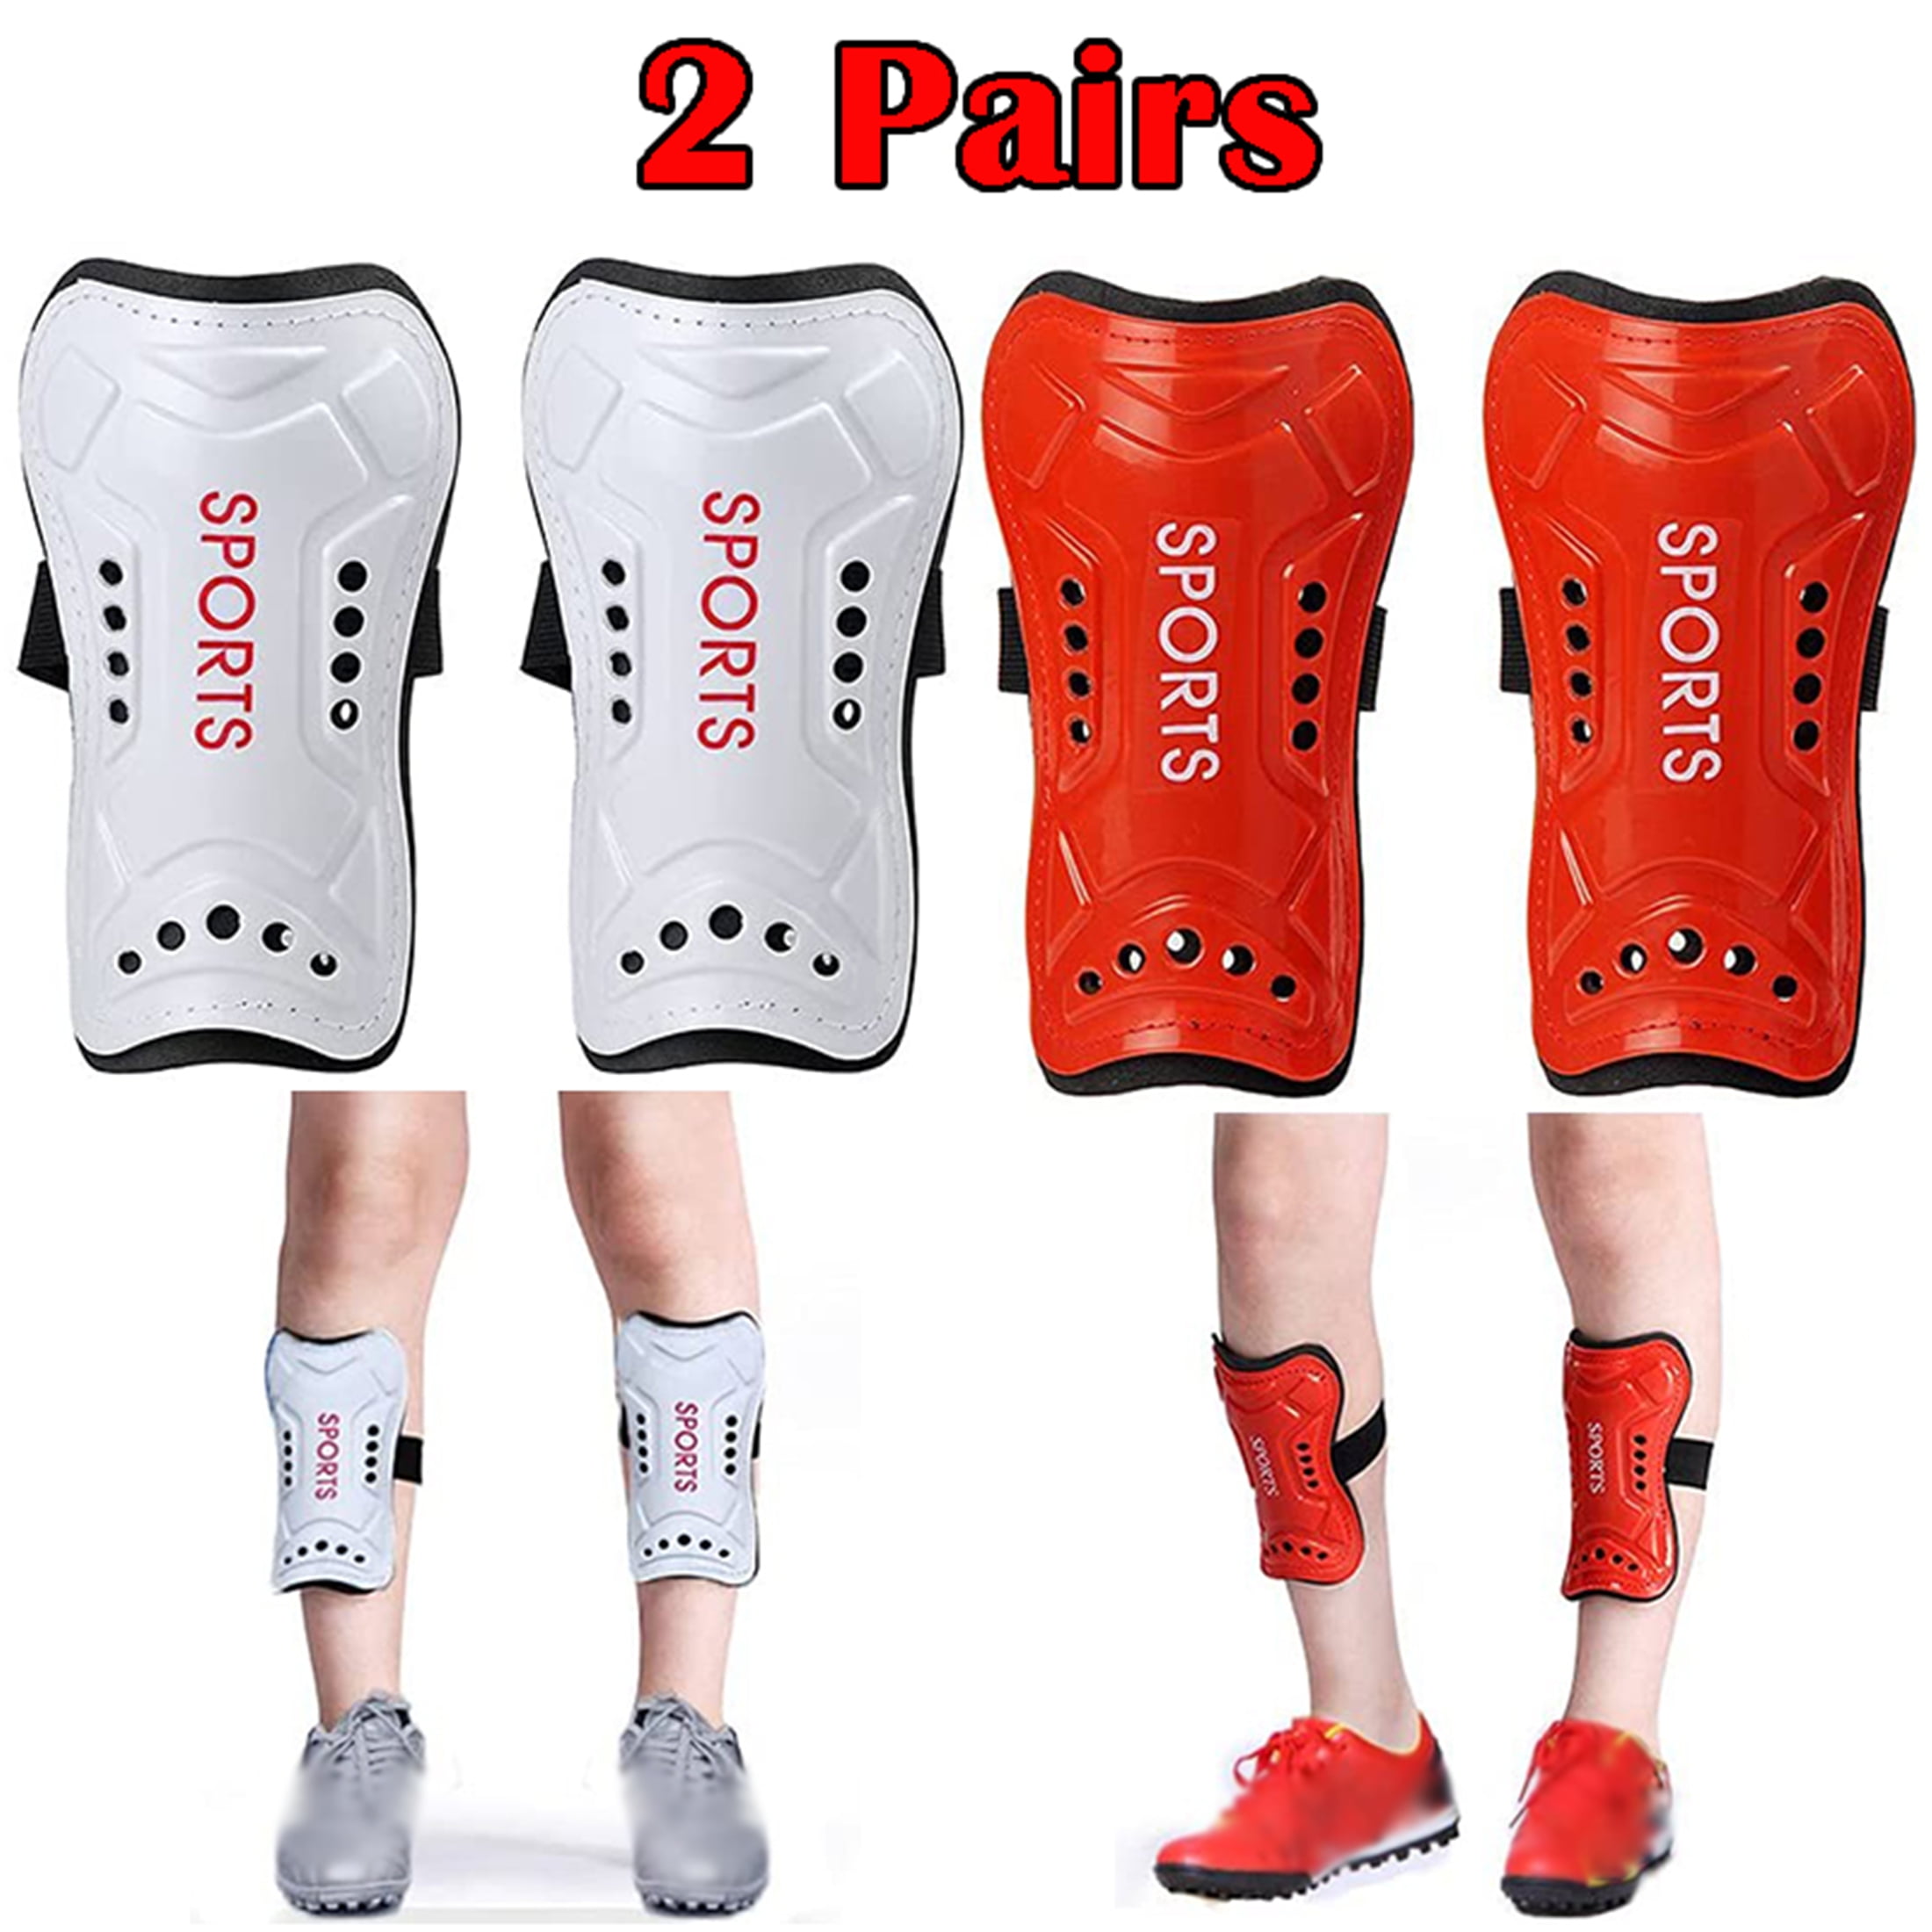 2 Pair Kids shin Guards Perforated Soccer Equipment for Boys and Girls 